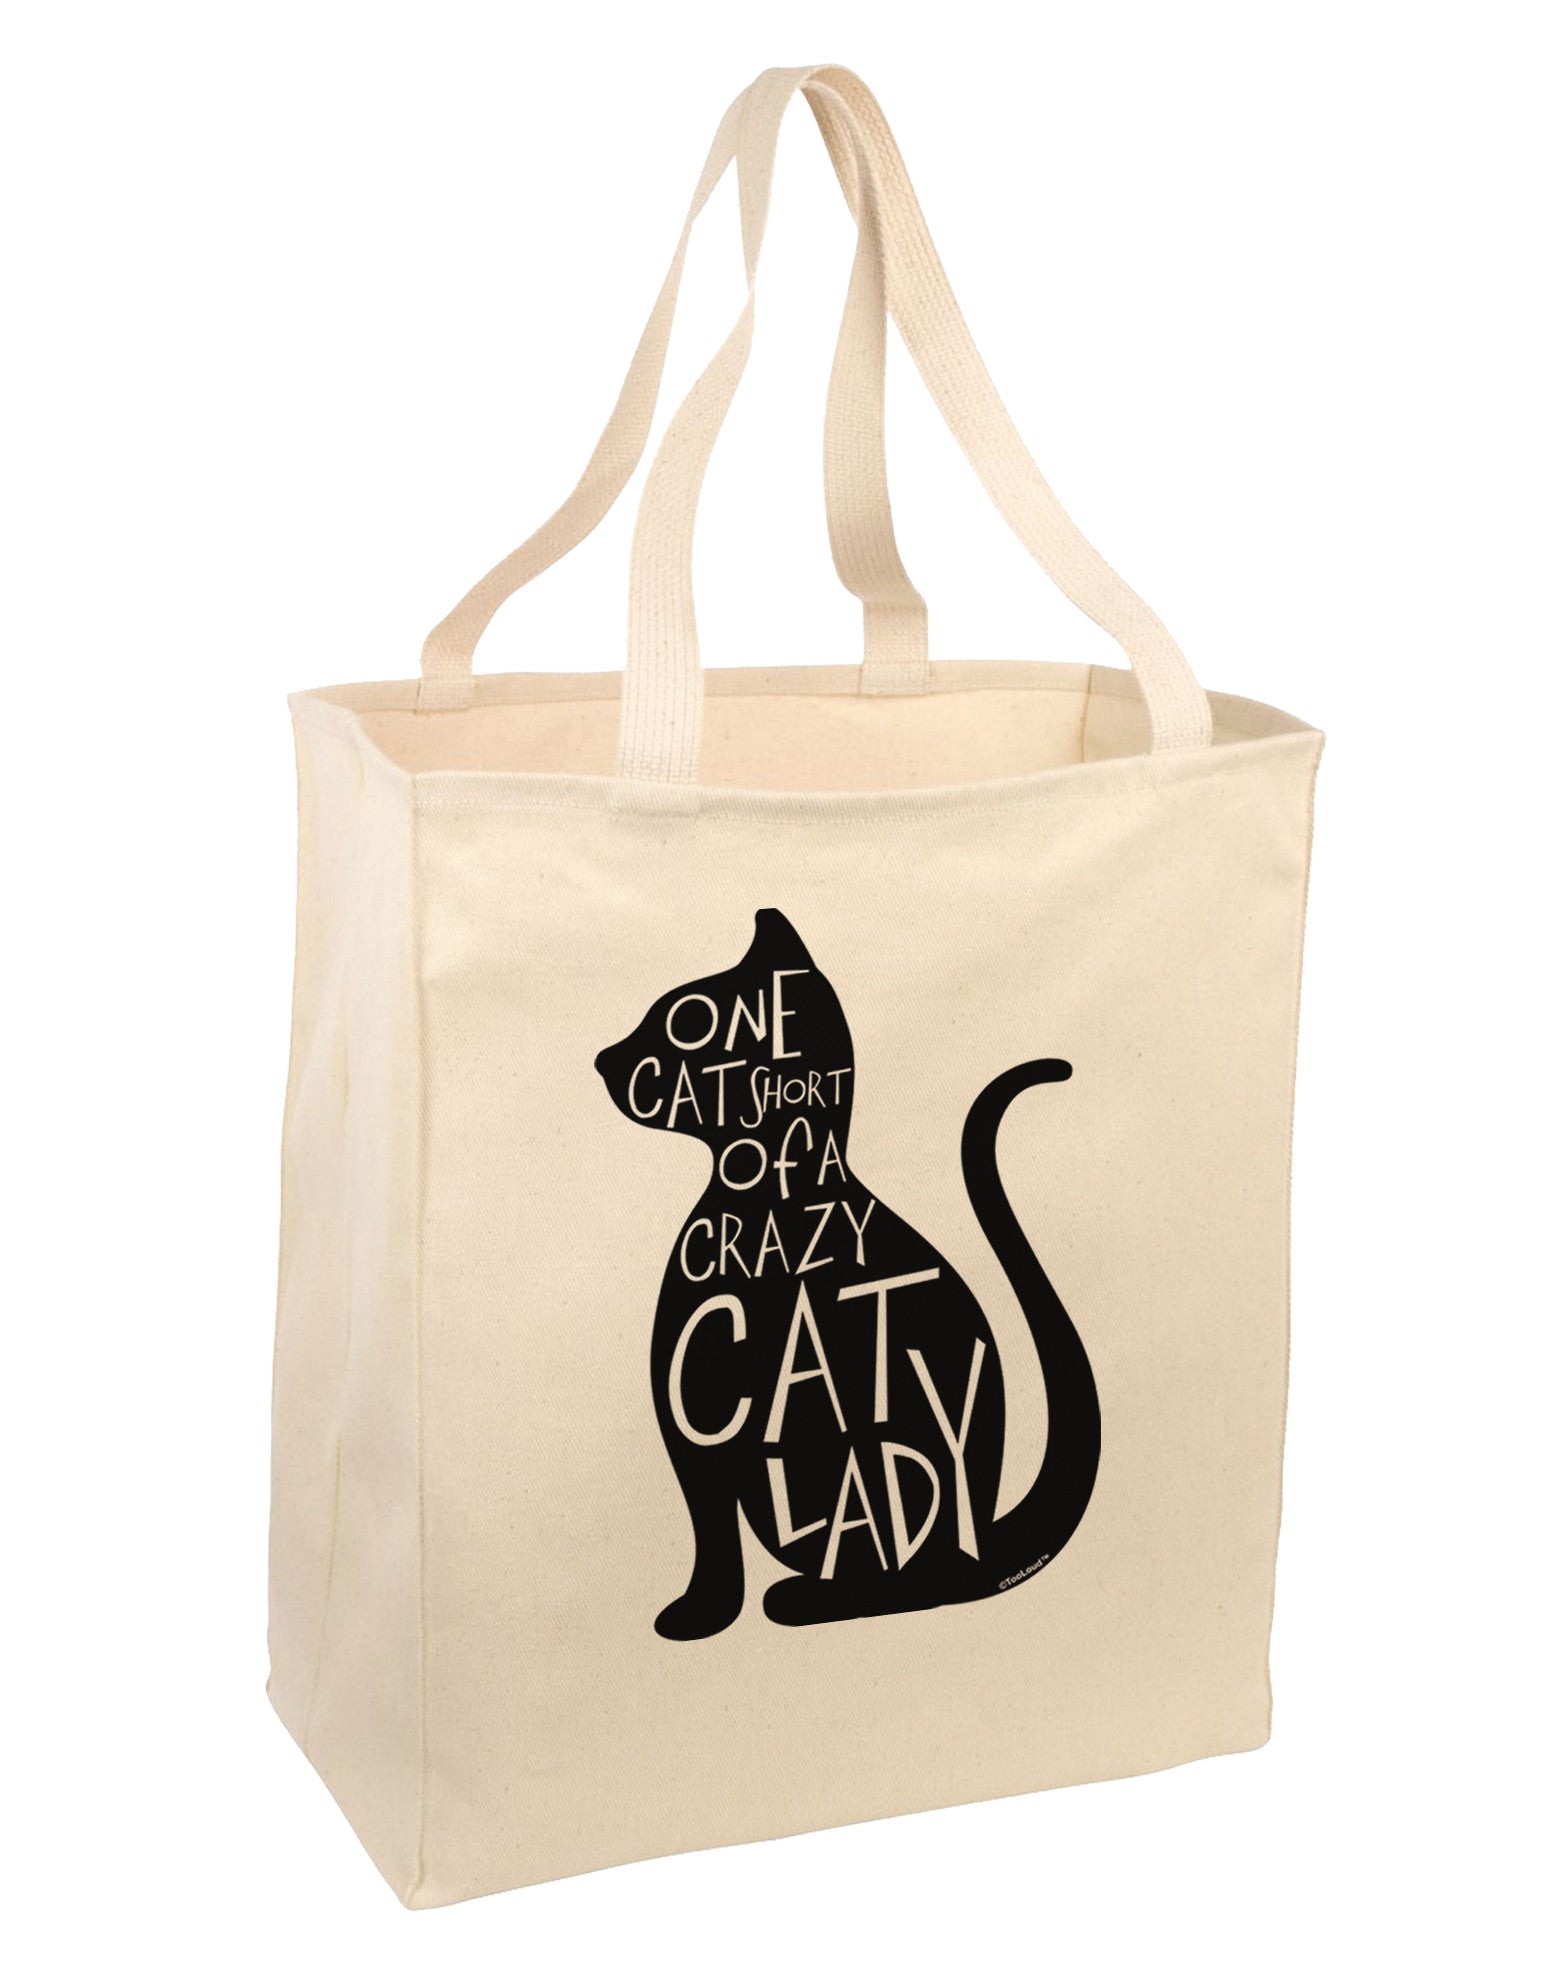 One Cat Short Of A Crazy Cat Lady Large Grocery Tote Bag - Davson Sales